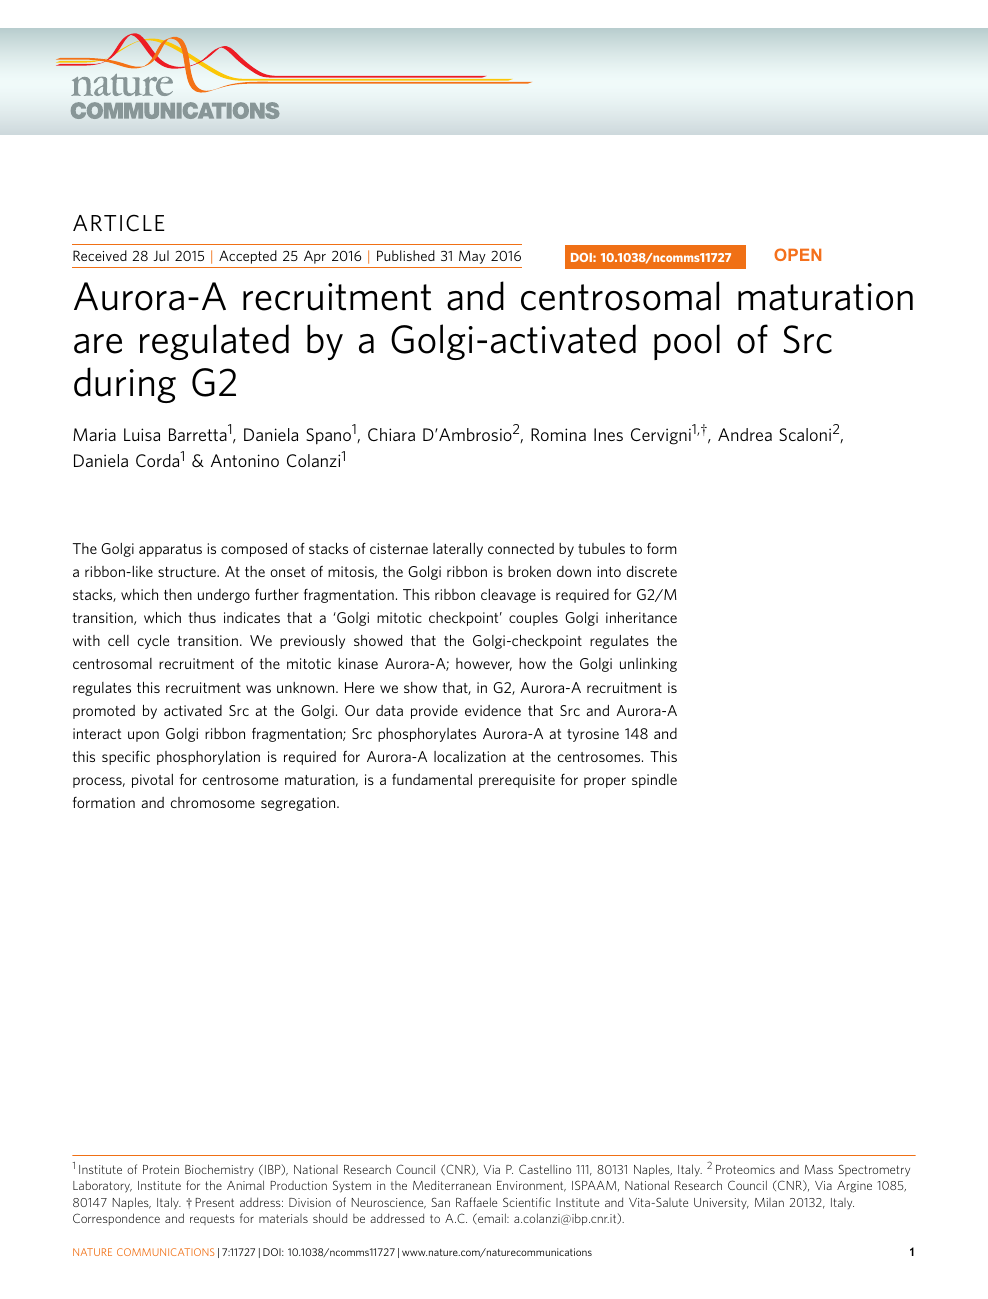 Aurora A Recruitment And Centrosomal Maturation Are Regulated By A Golgi Activated Pool Of Src During G2 Topic Of Research Paper In Biological Sciences Download Scholarly Article Pdf And Read For Free On